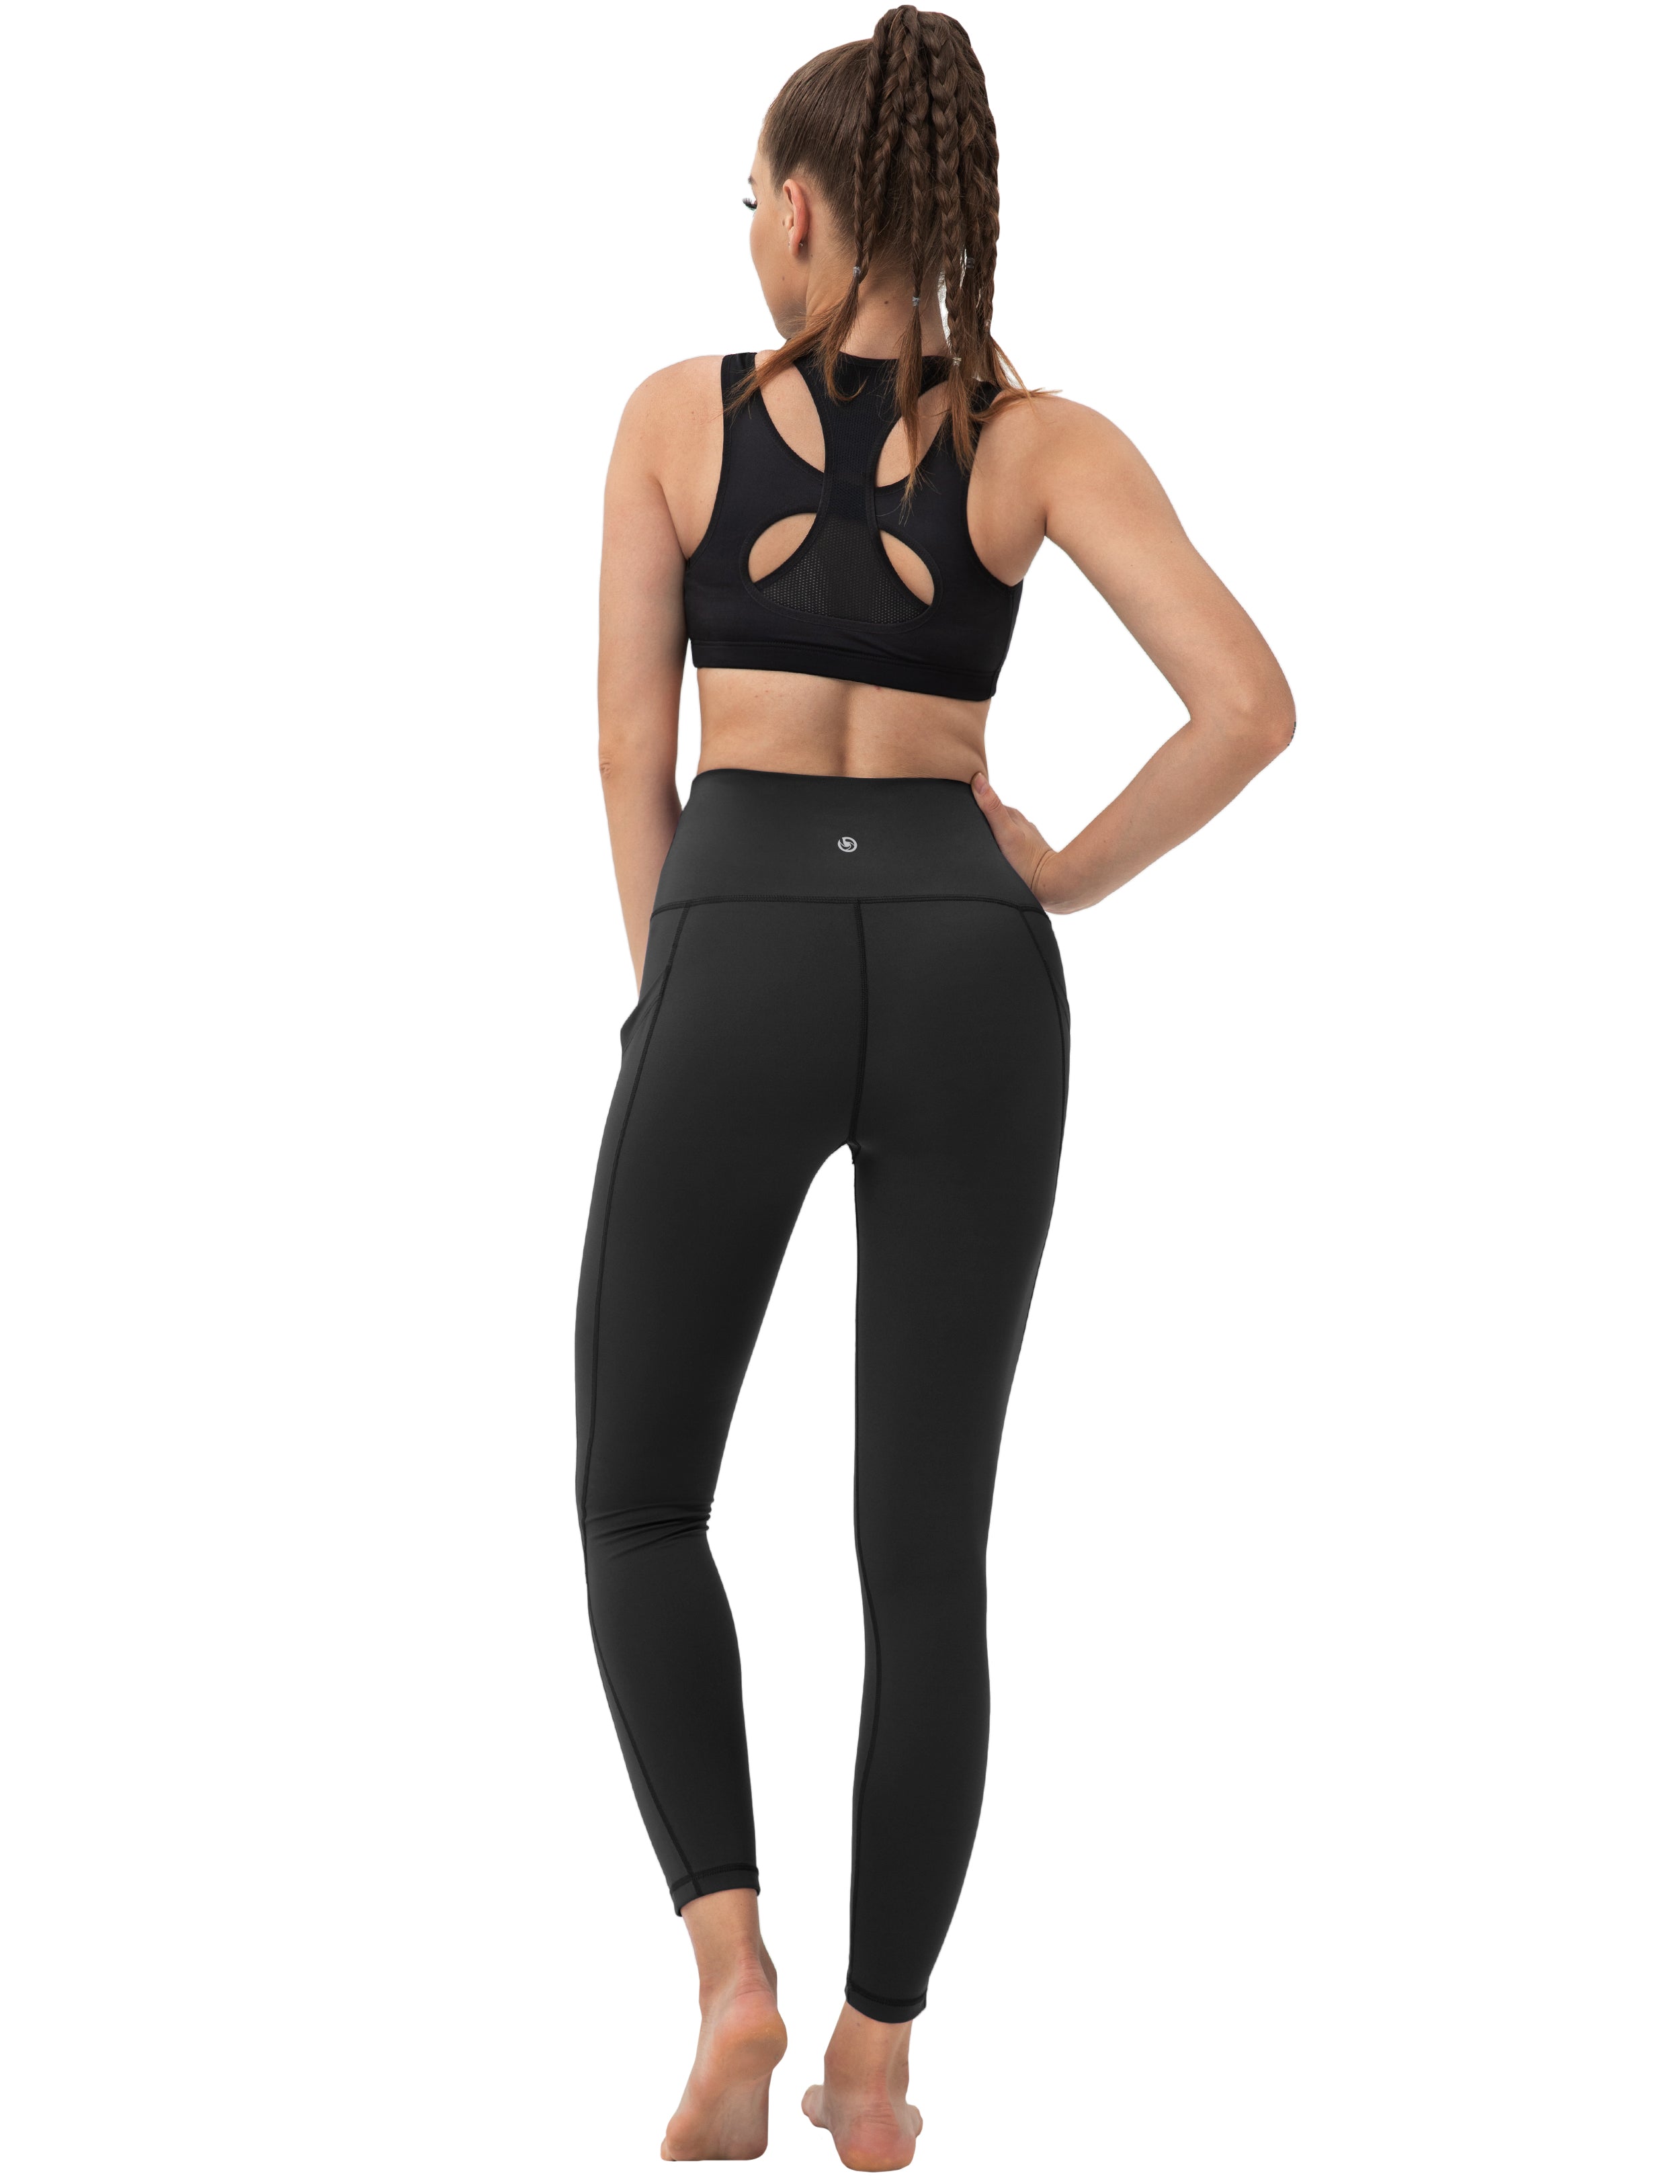 High Waist Side Pockets Running Pants black 75% Nylon, 25% Spandex Fabric doesn't attract lint easily 4-way stretch No see-through Moisture-wicking Tummy control Inner pocket